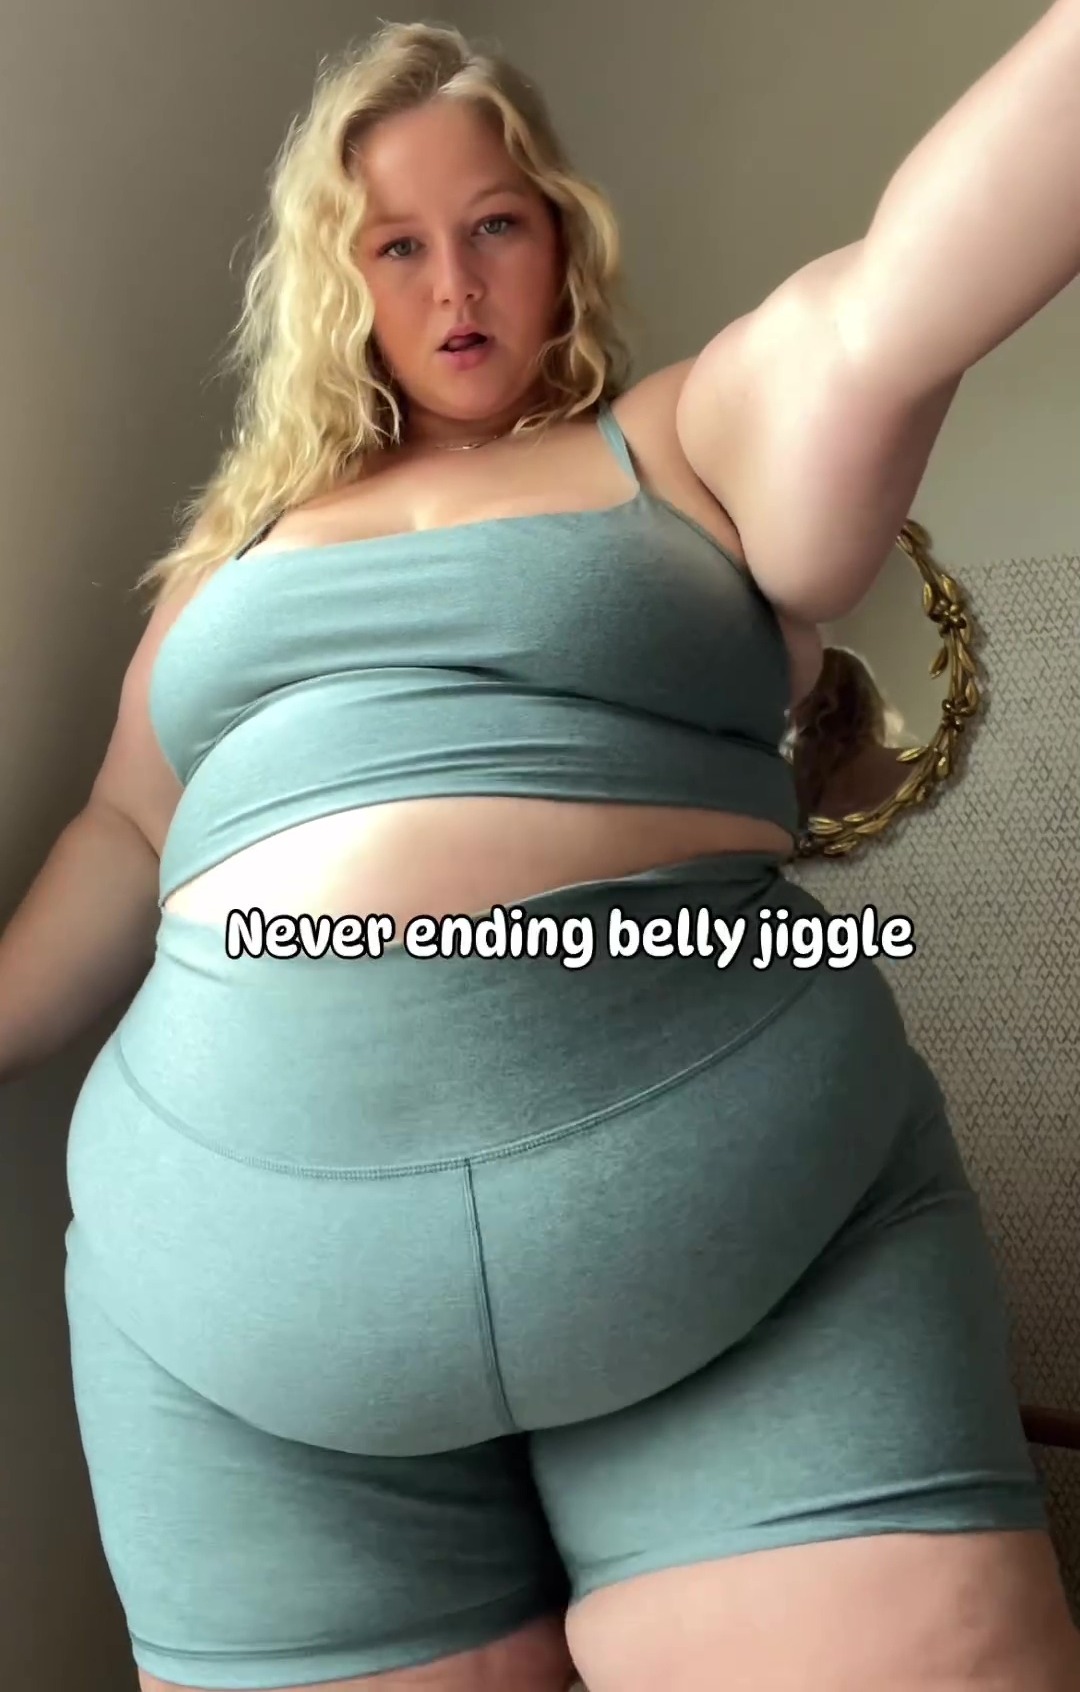 She danced around to show off her belly jiggle